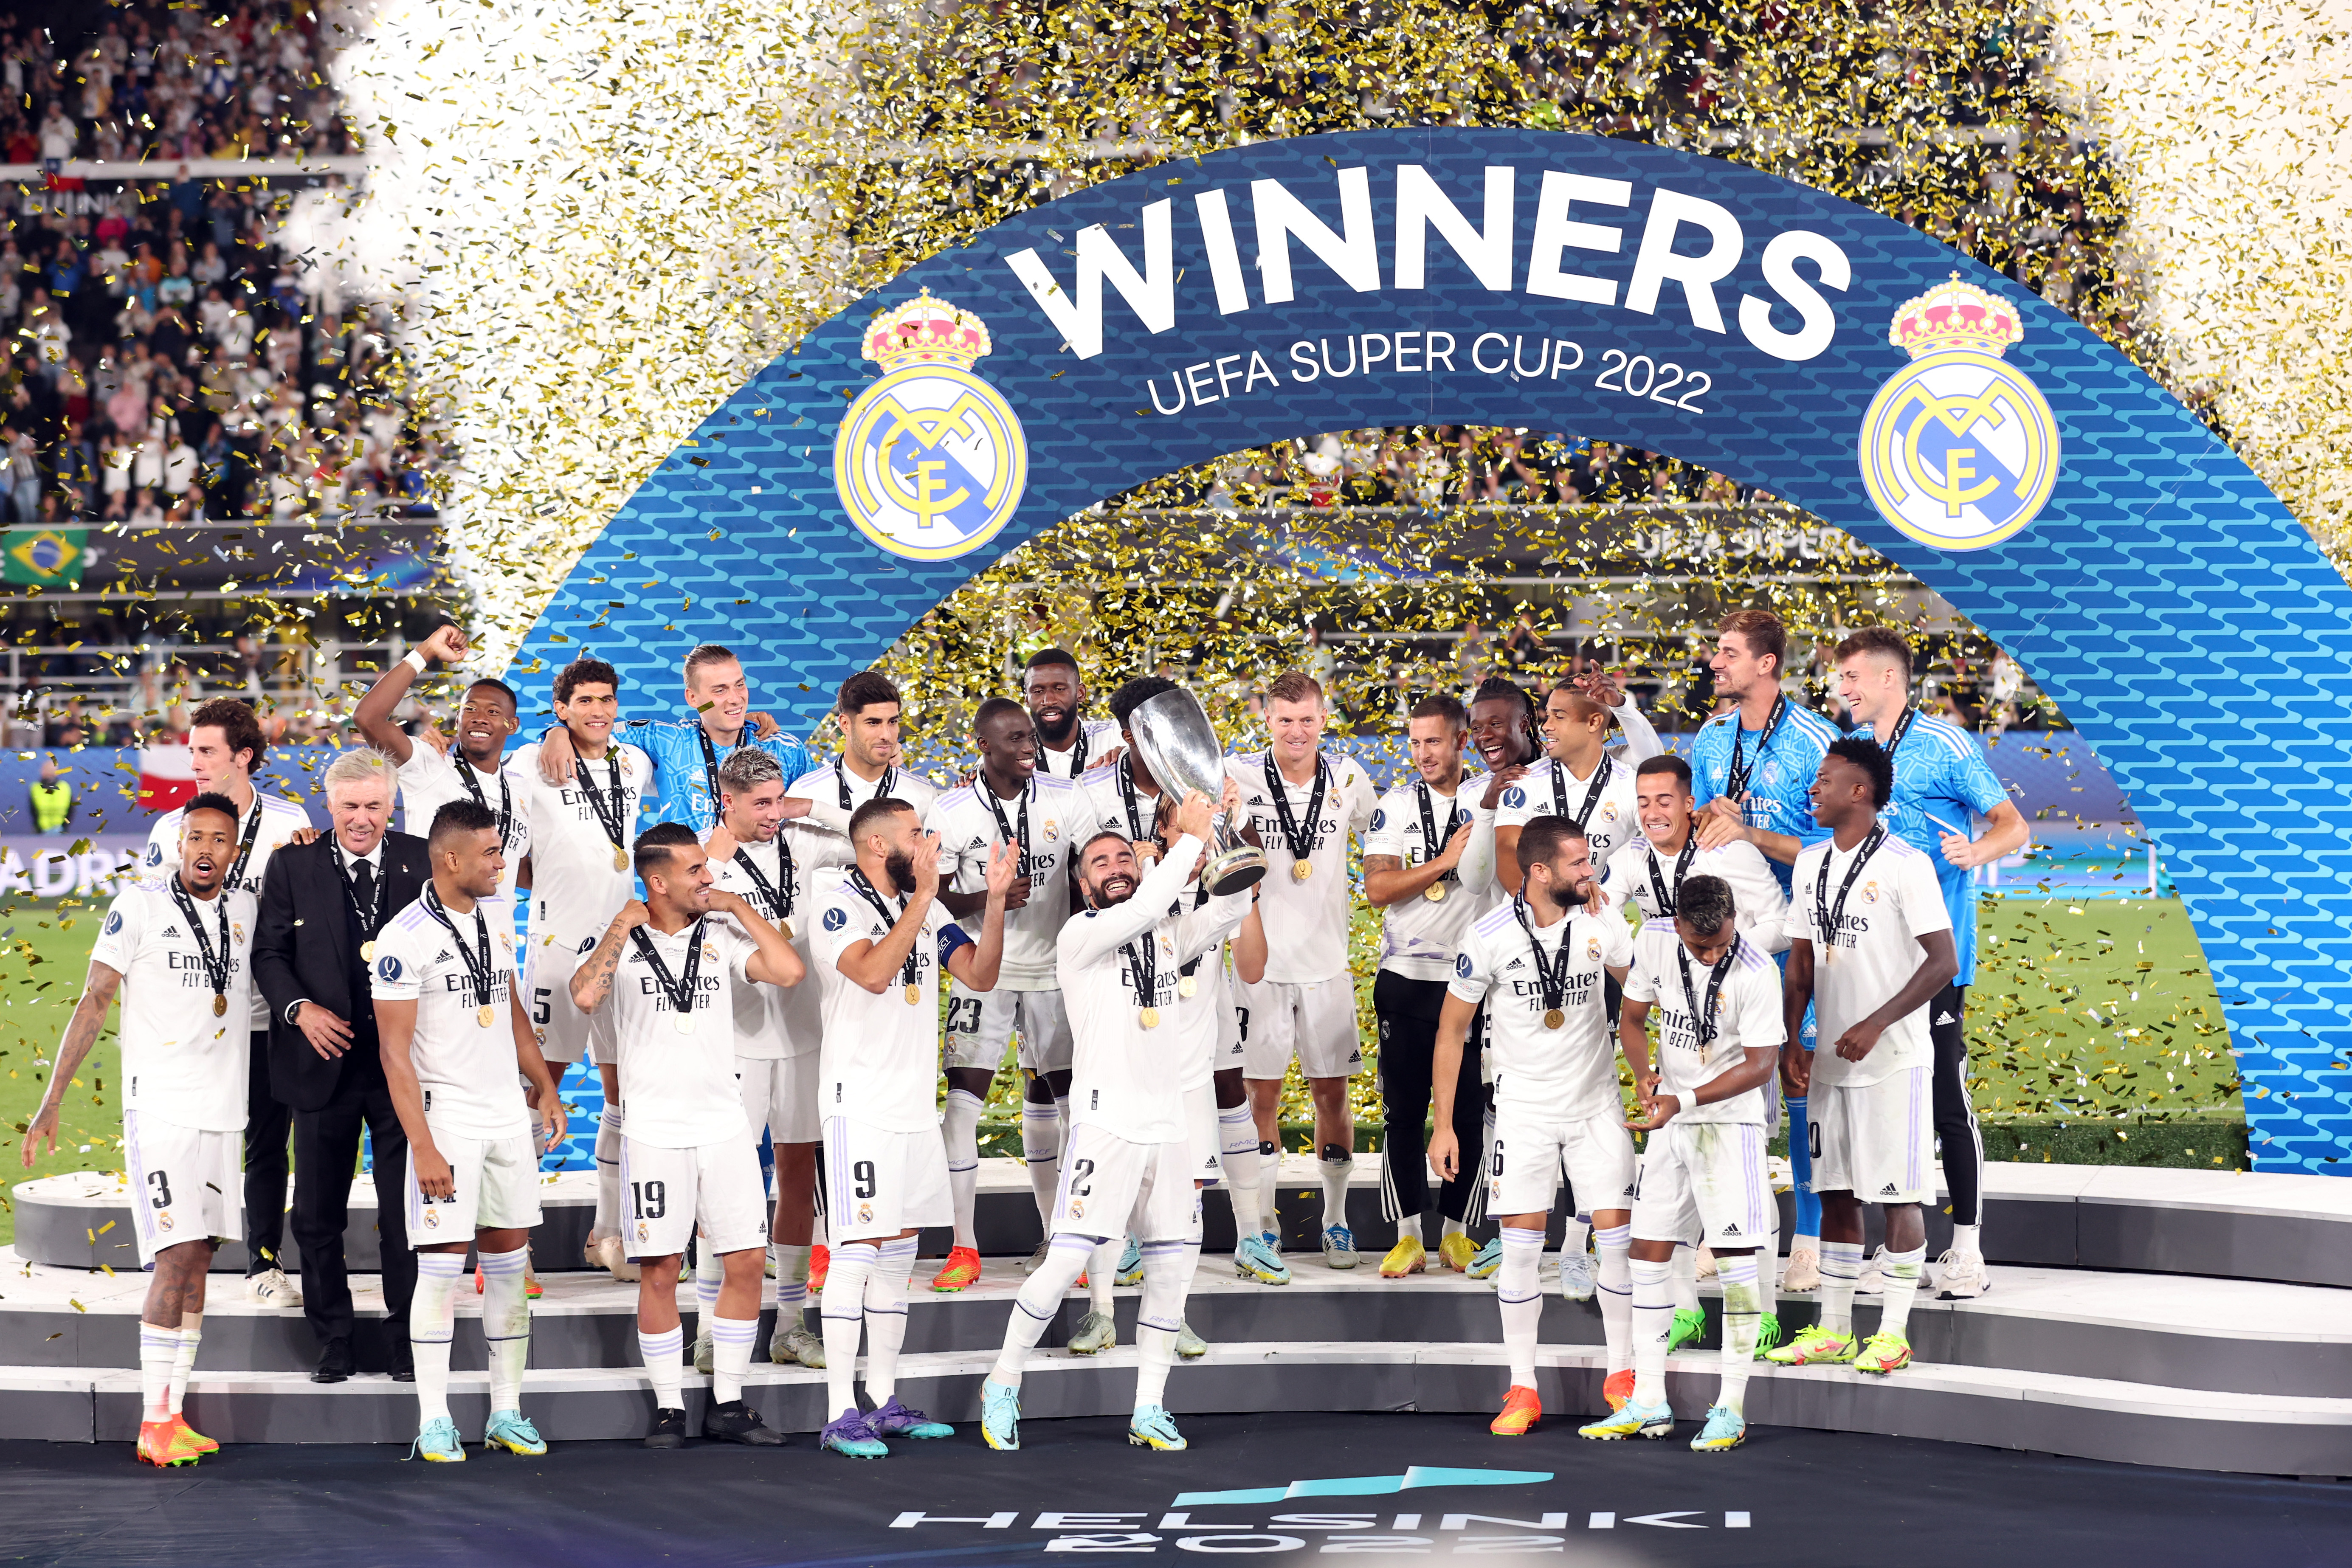 The players of Real Madrid celebrate with a trophy in front of a giant white and blue banner that says WINNERS